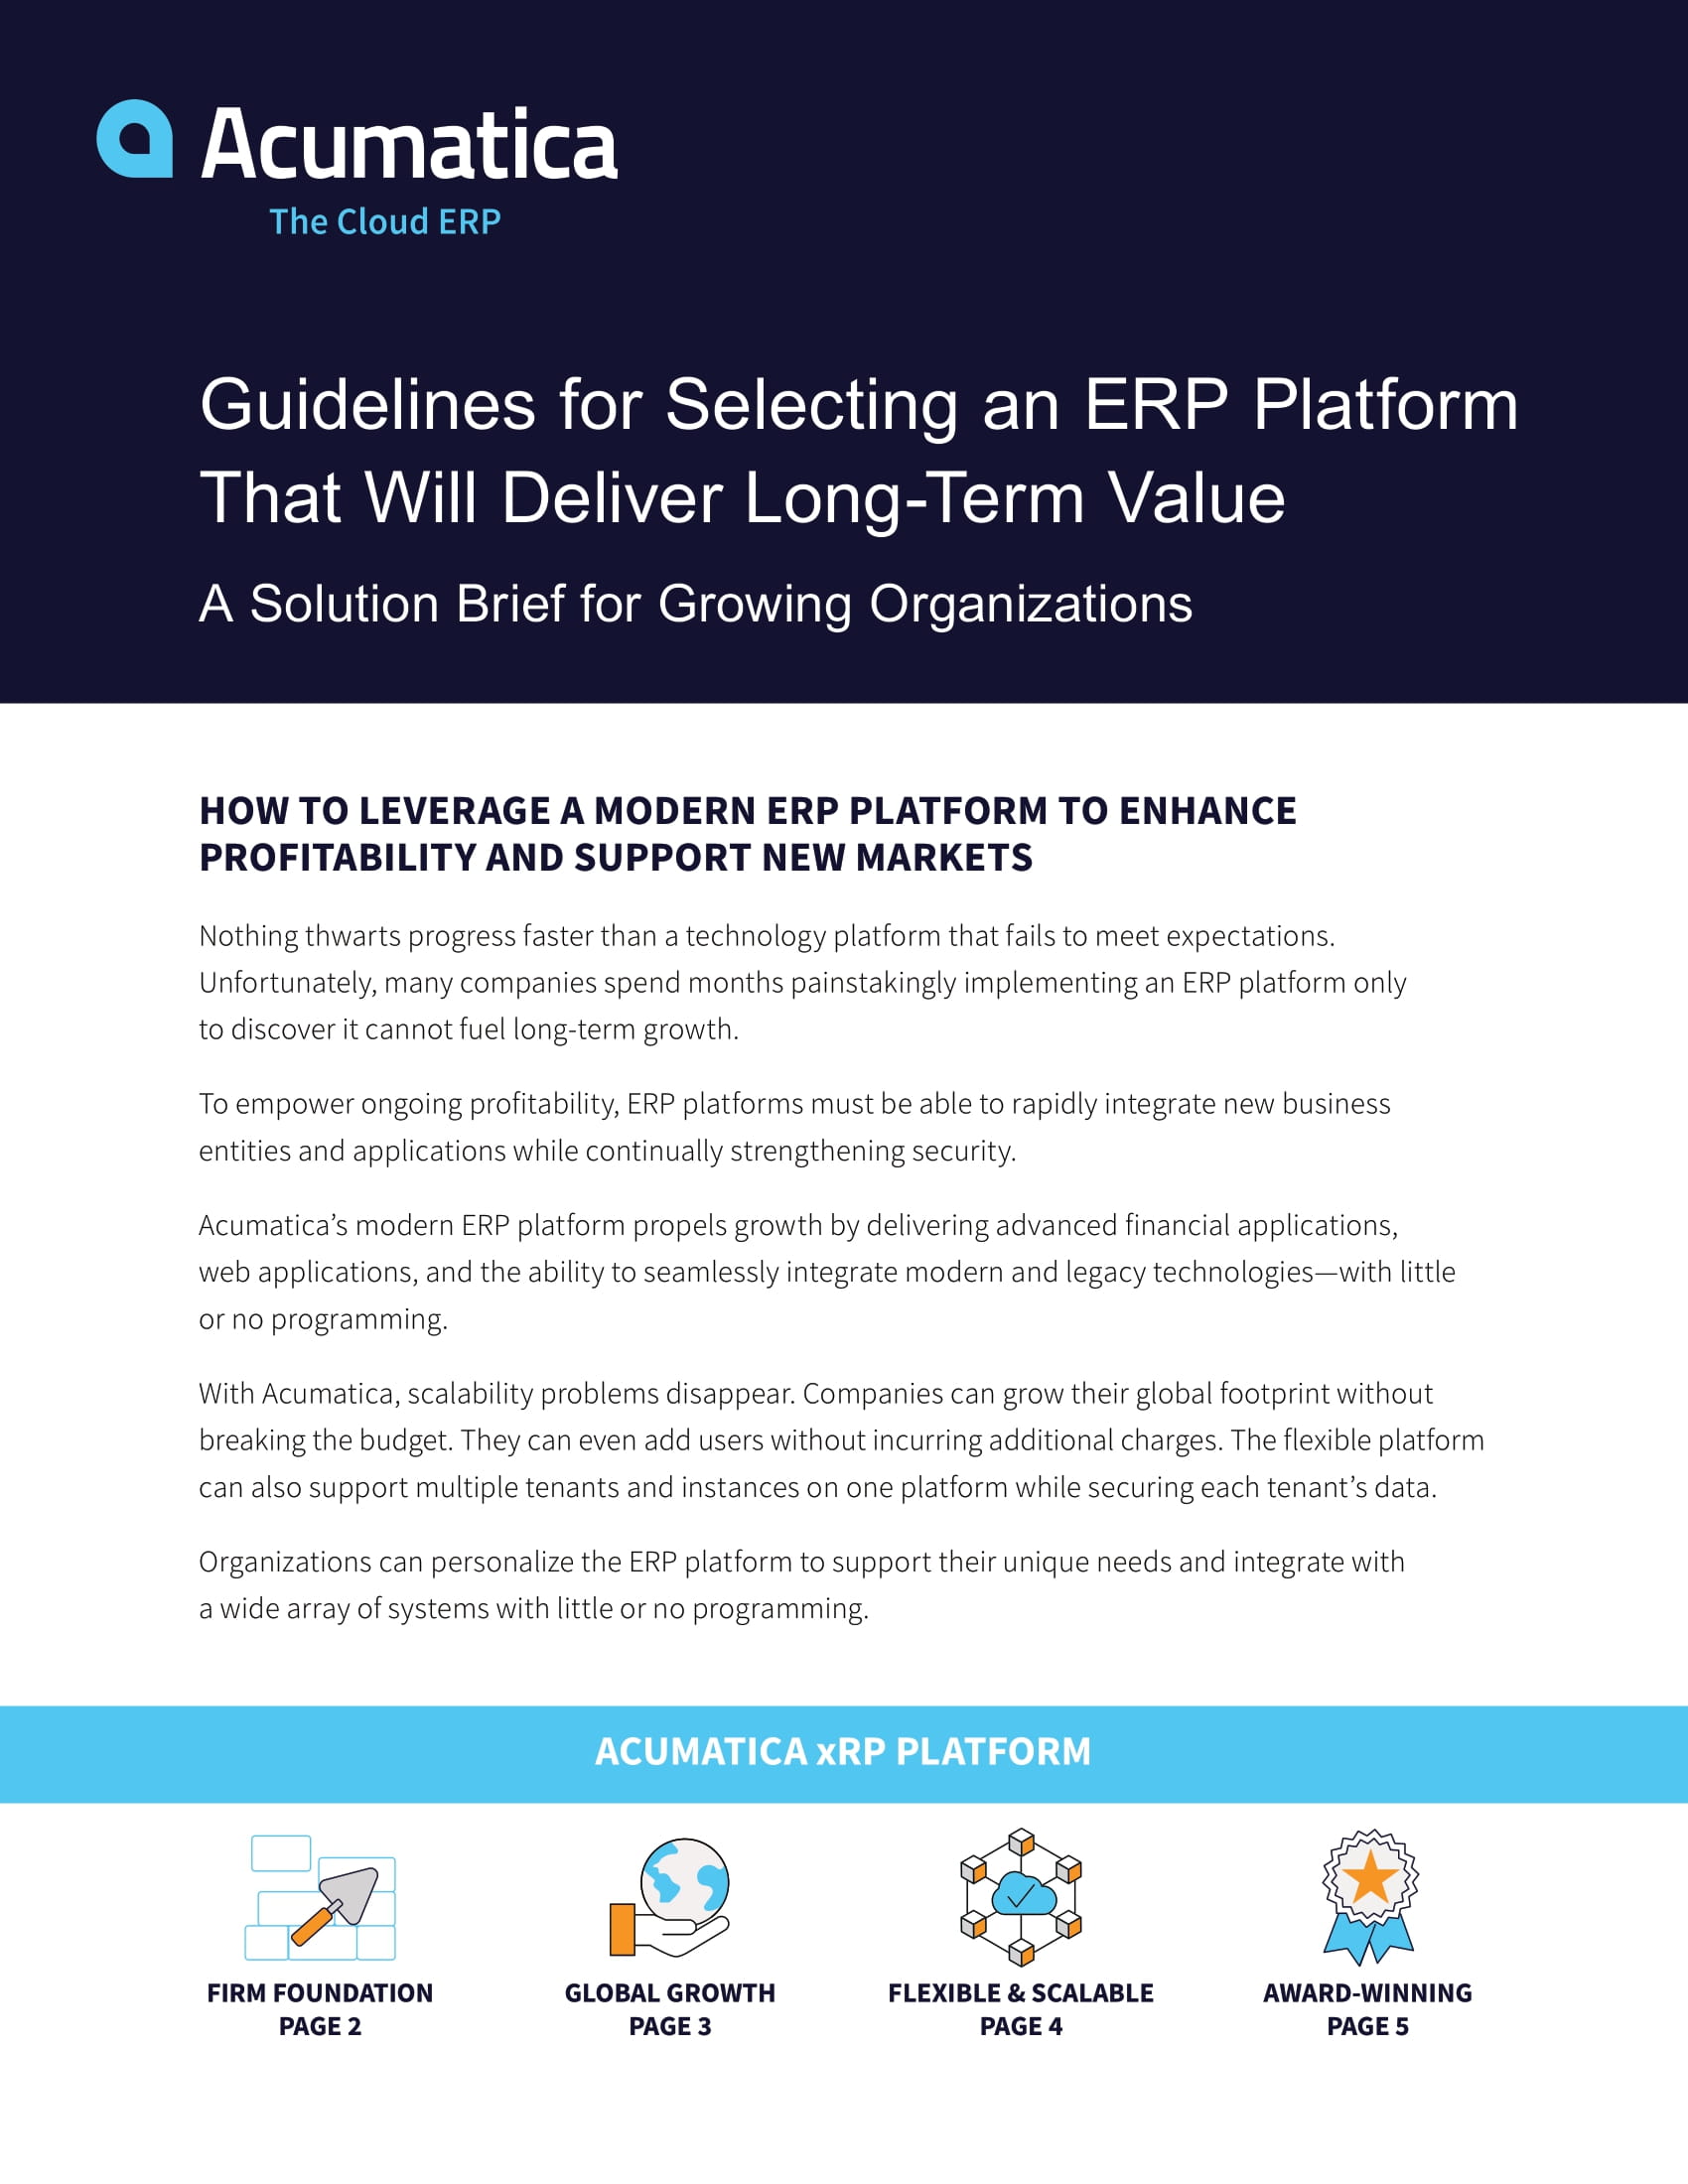 Leverage a Modern ERP Platform for Future Growth and Profitability